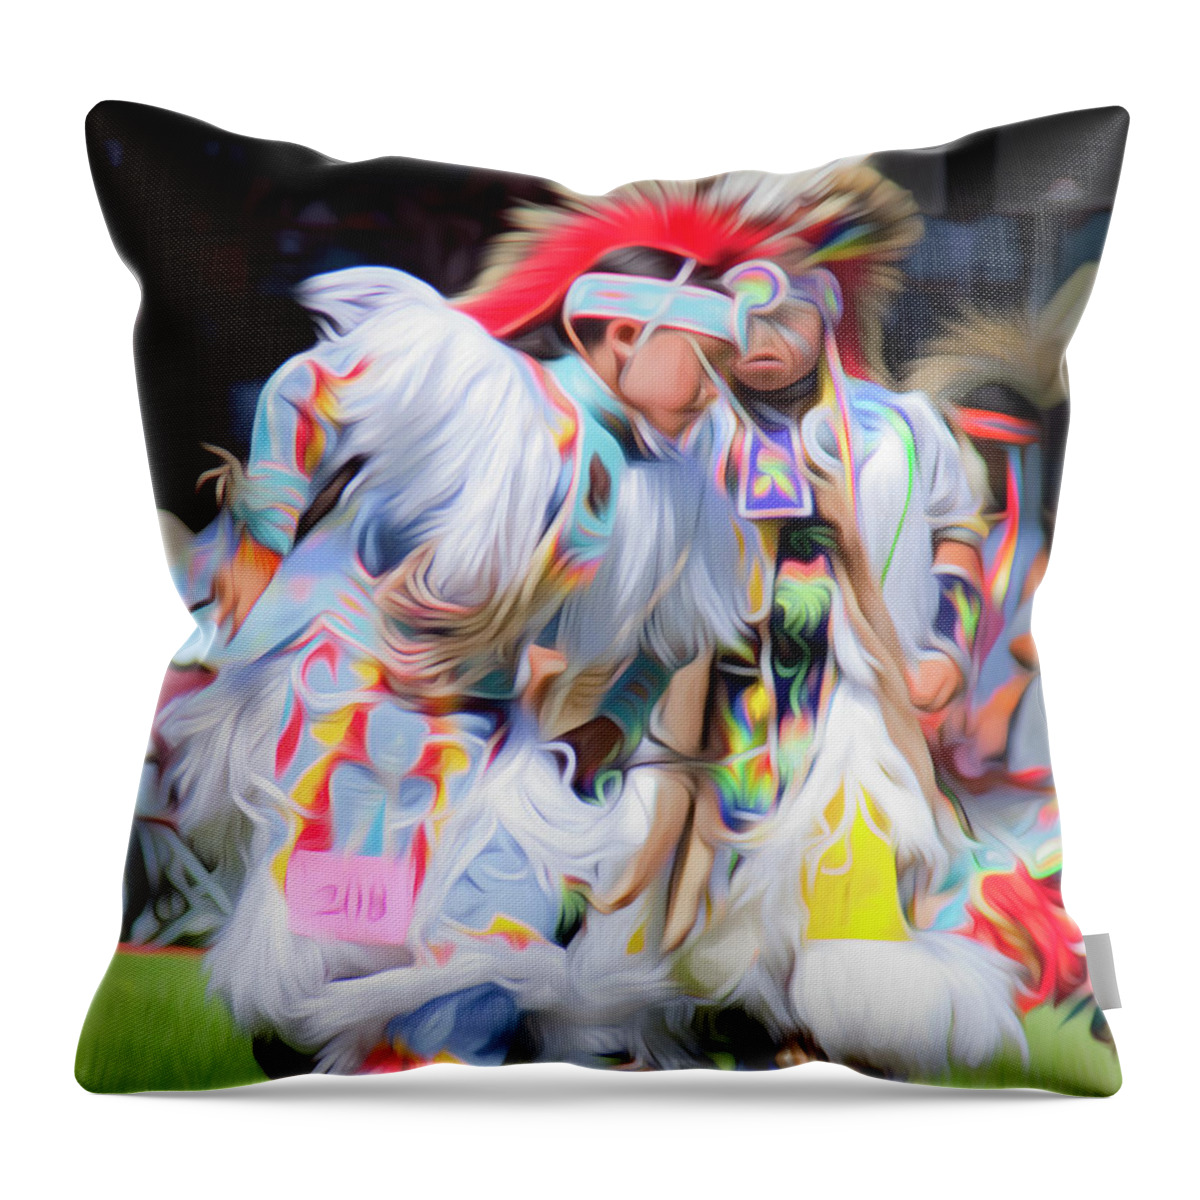 Celebration Throw Pillow featuring the photograph Young Grass Dancers by Theresa Tahara